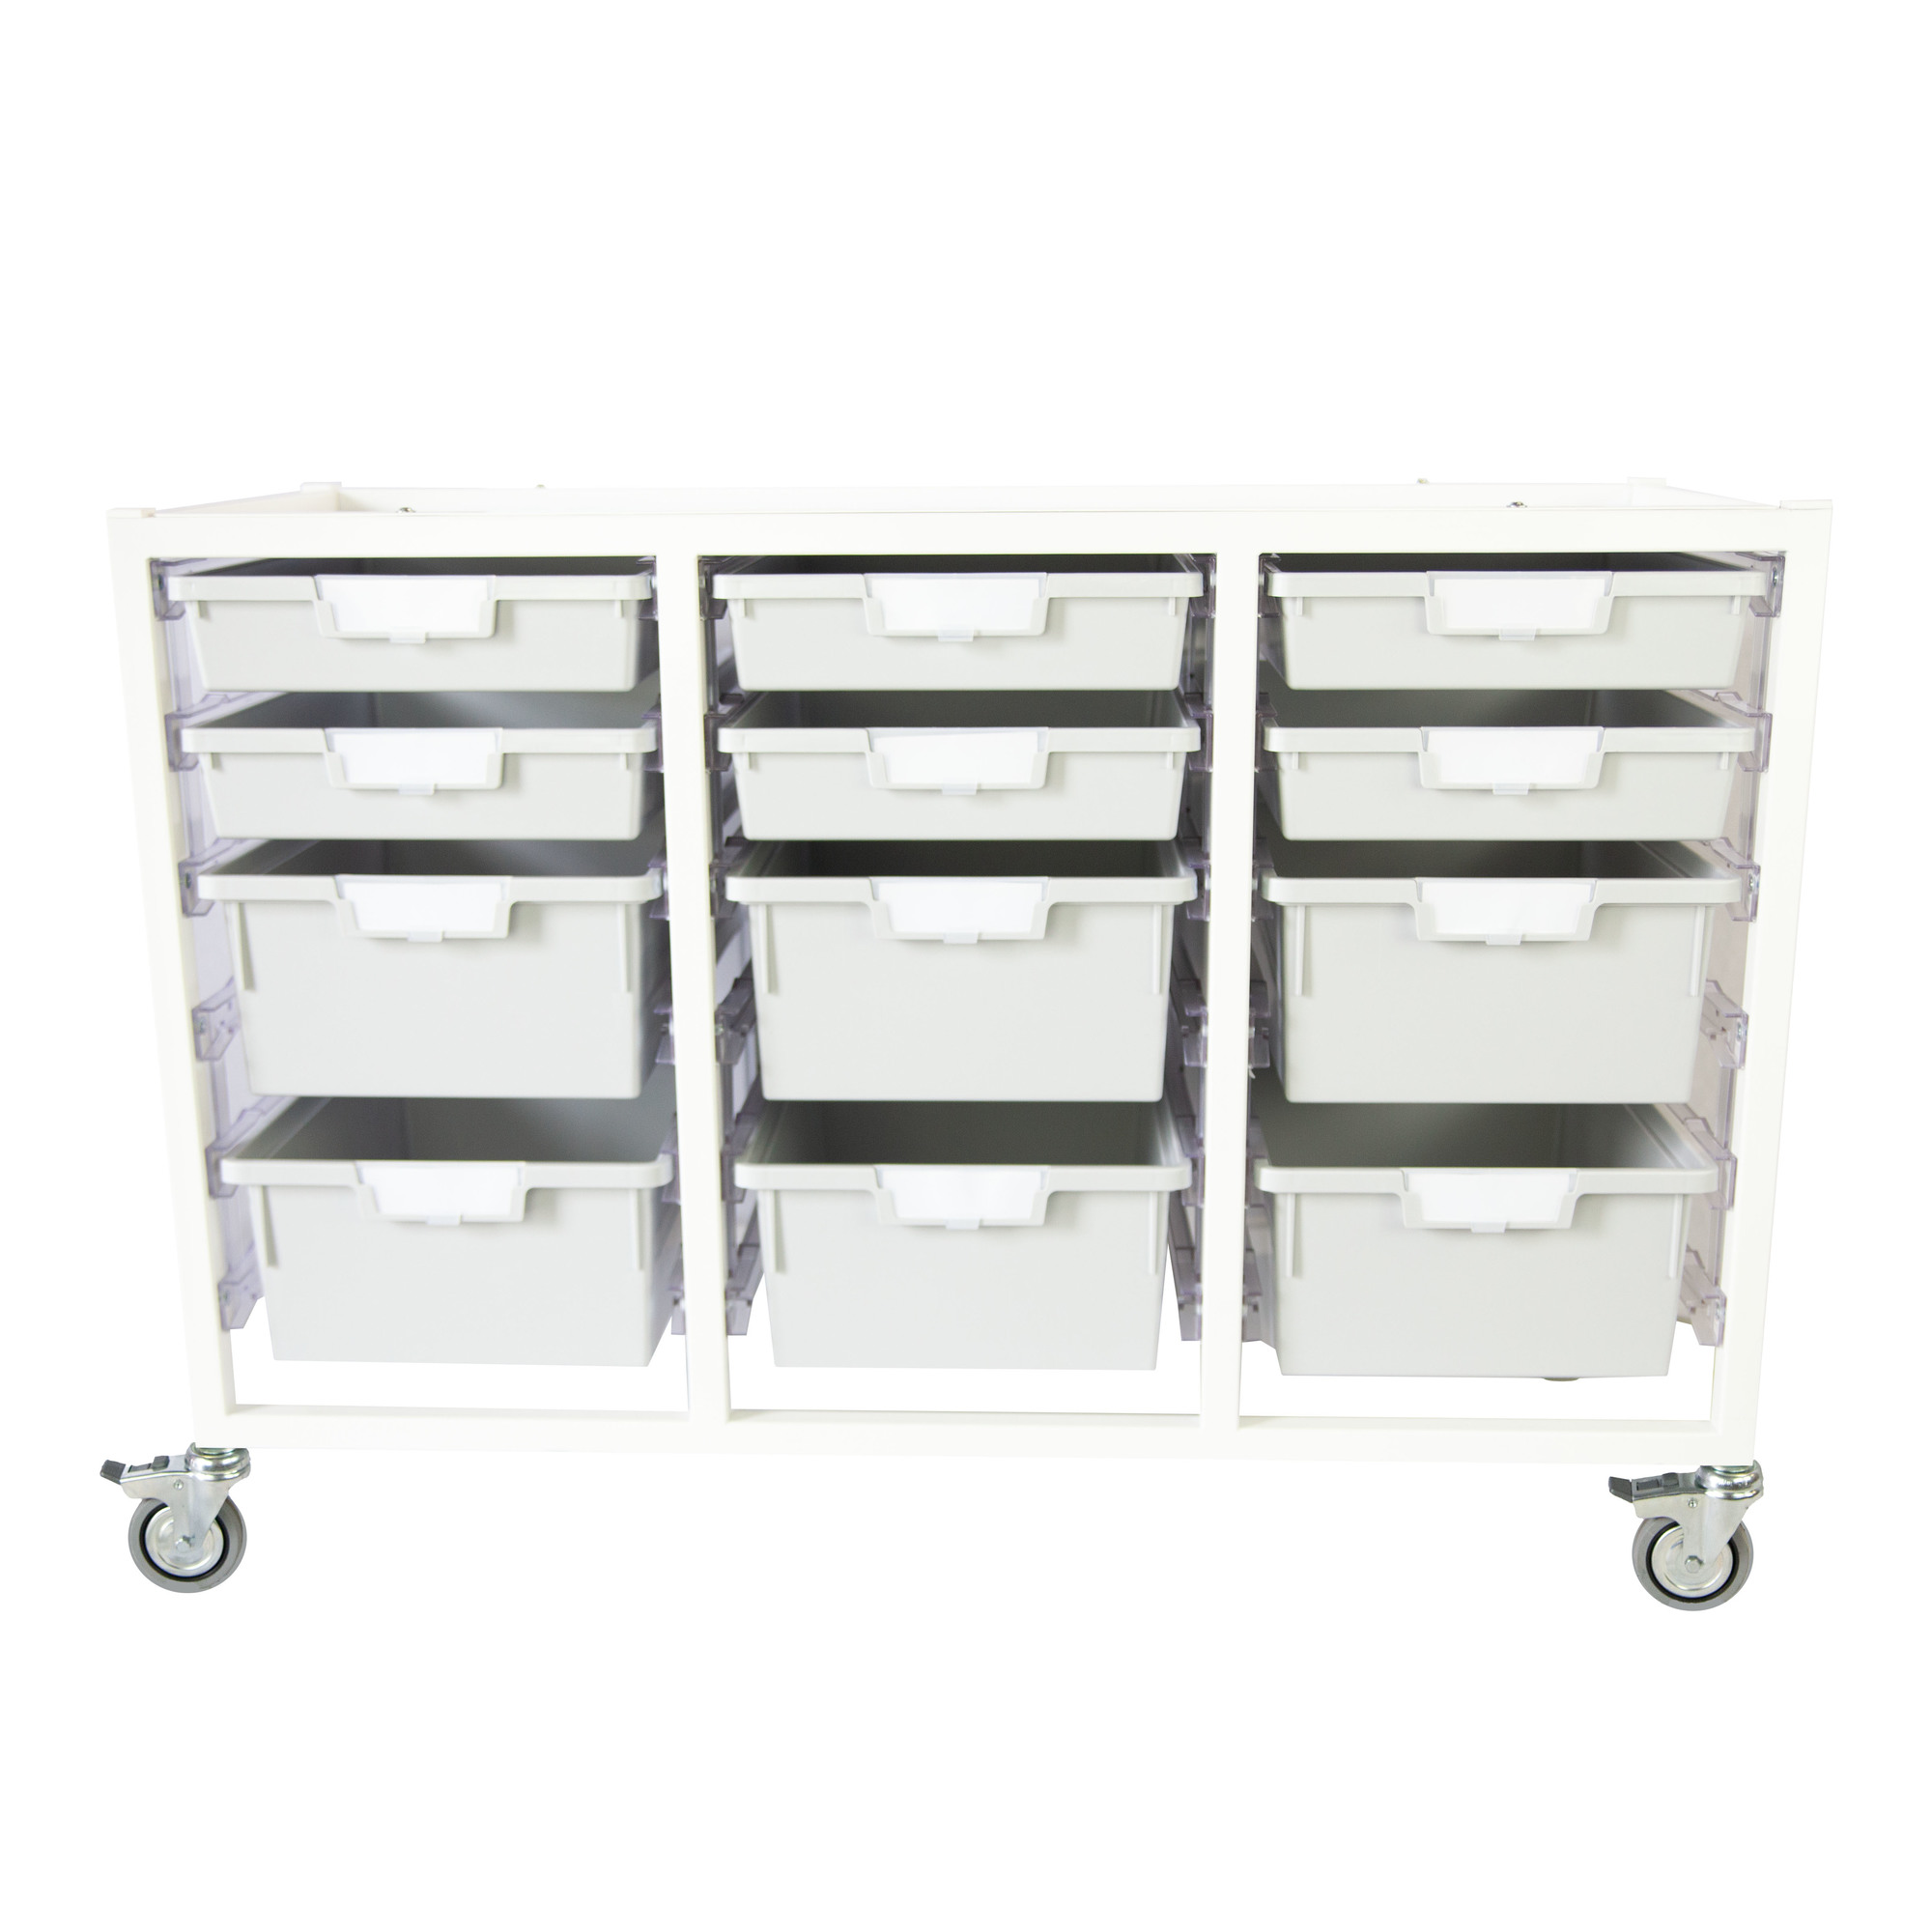 Certwood, Swift Cart Slim-White with 12 Gray Trays, Included (qty.) 1, Material Steel, Height 43.5 in, Model CE2106WH-6S6DLG